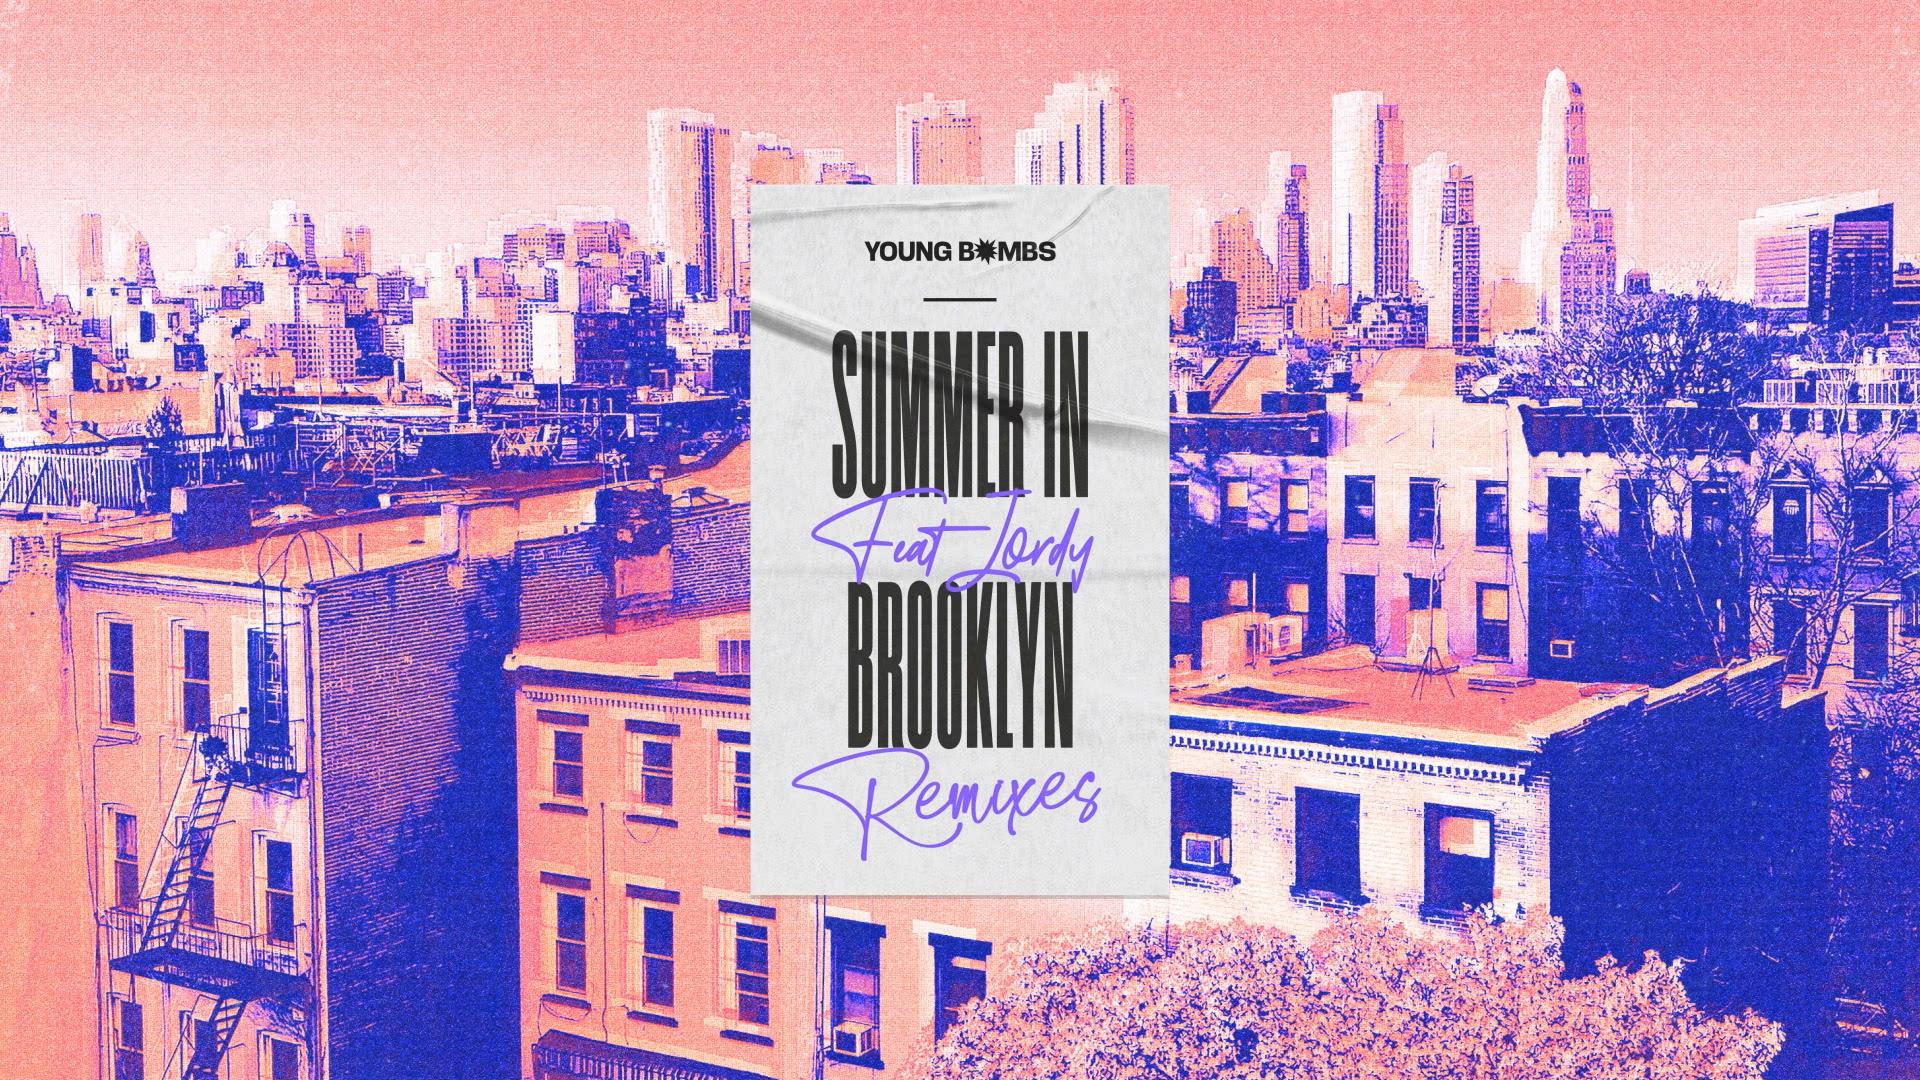 YOUNG BOMBS - Summer in Brooklyn (Kbubs Remix) (Visualizer)